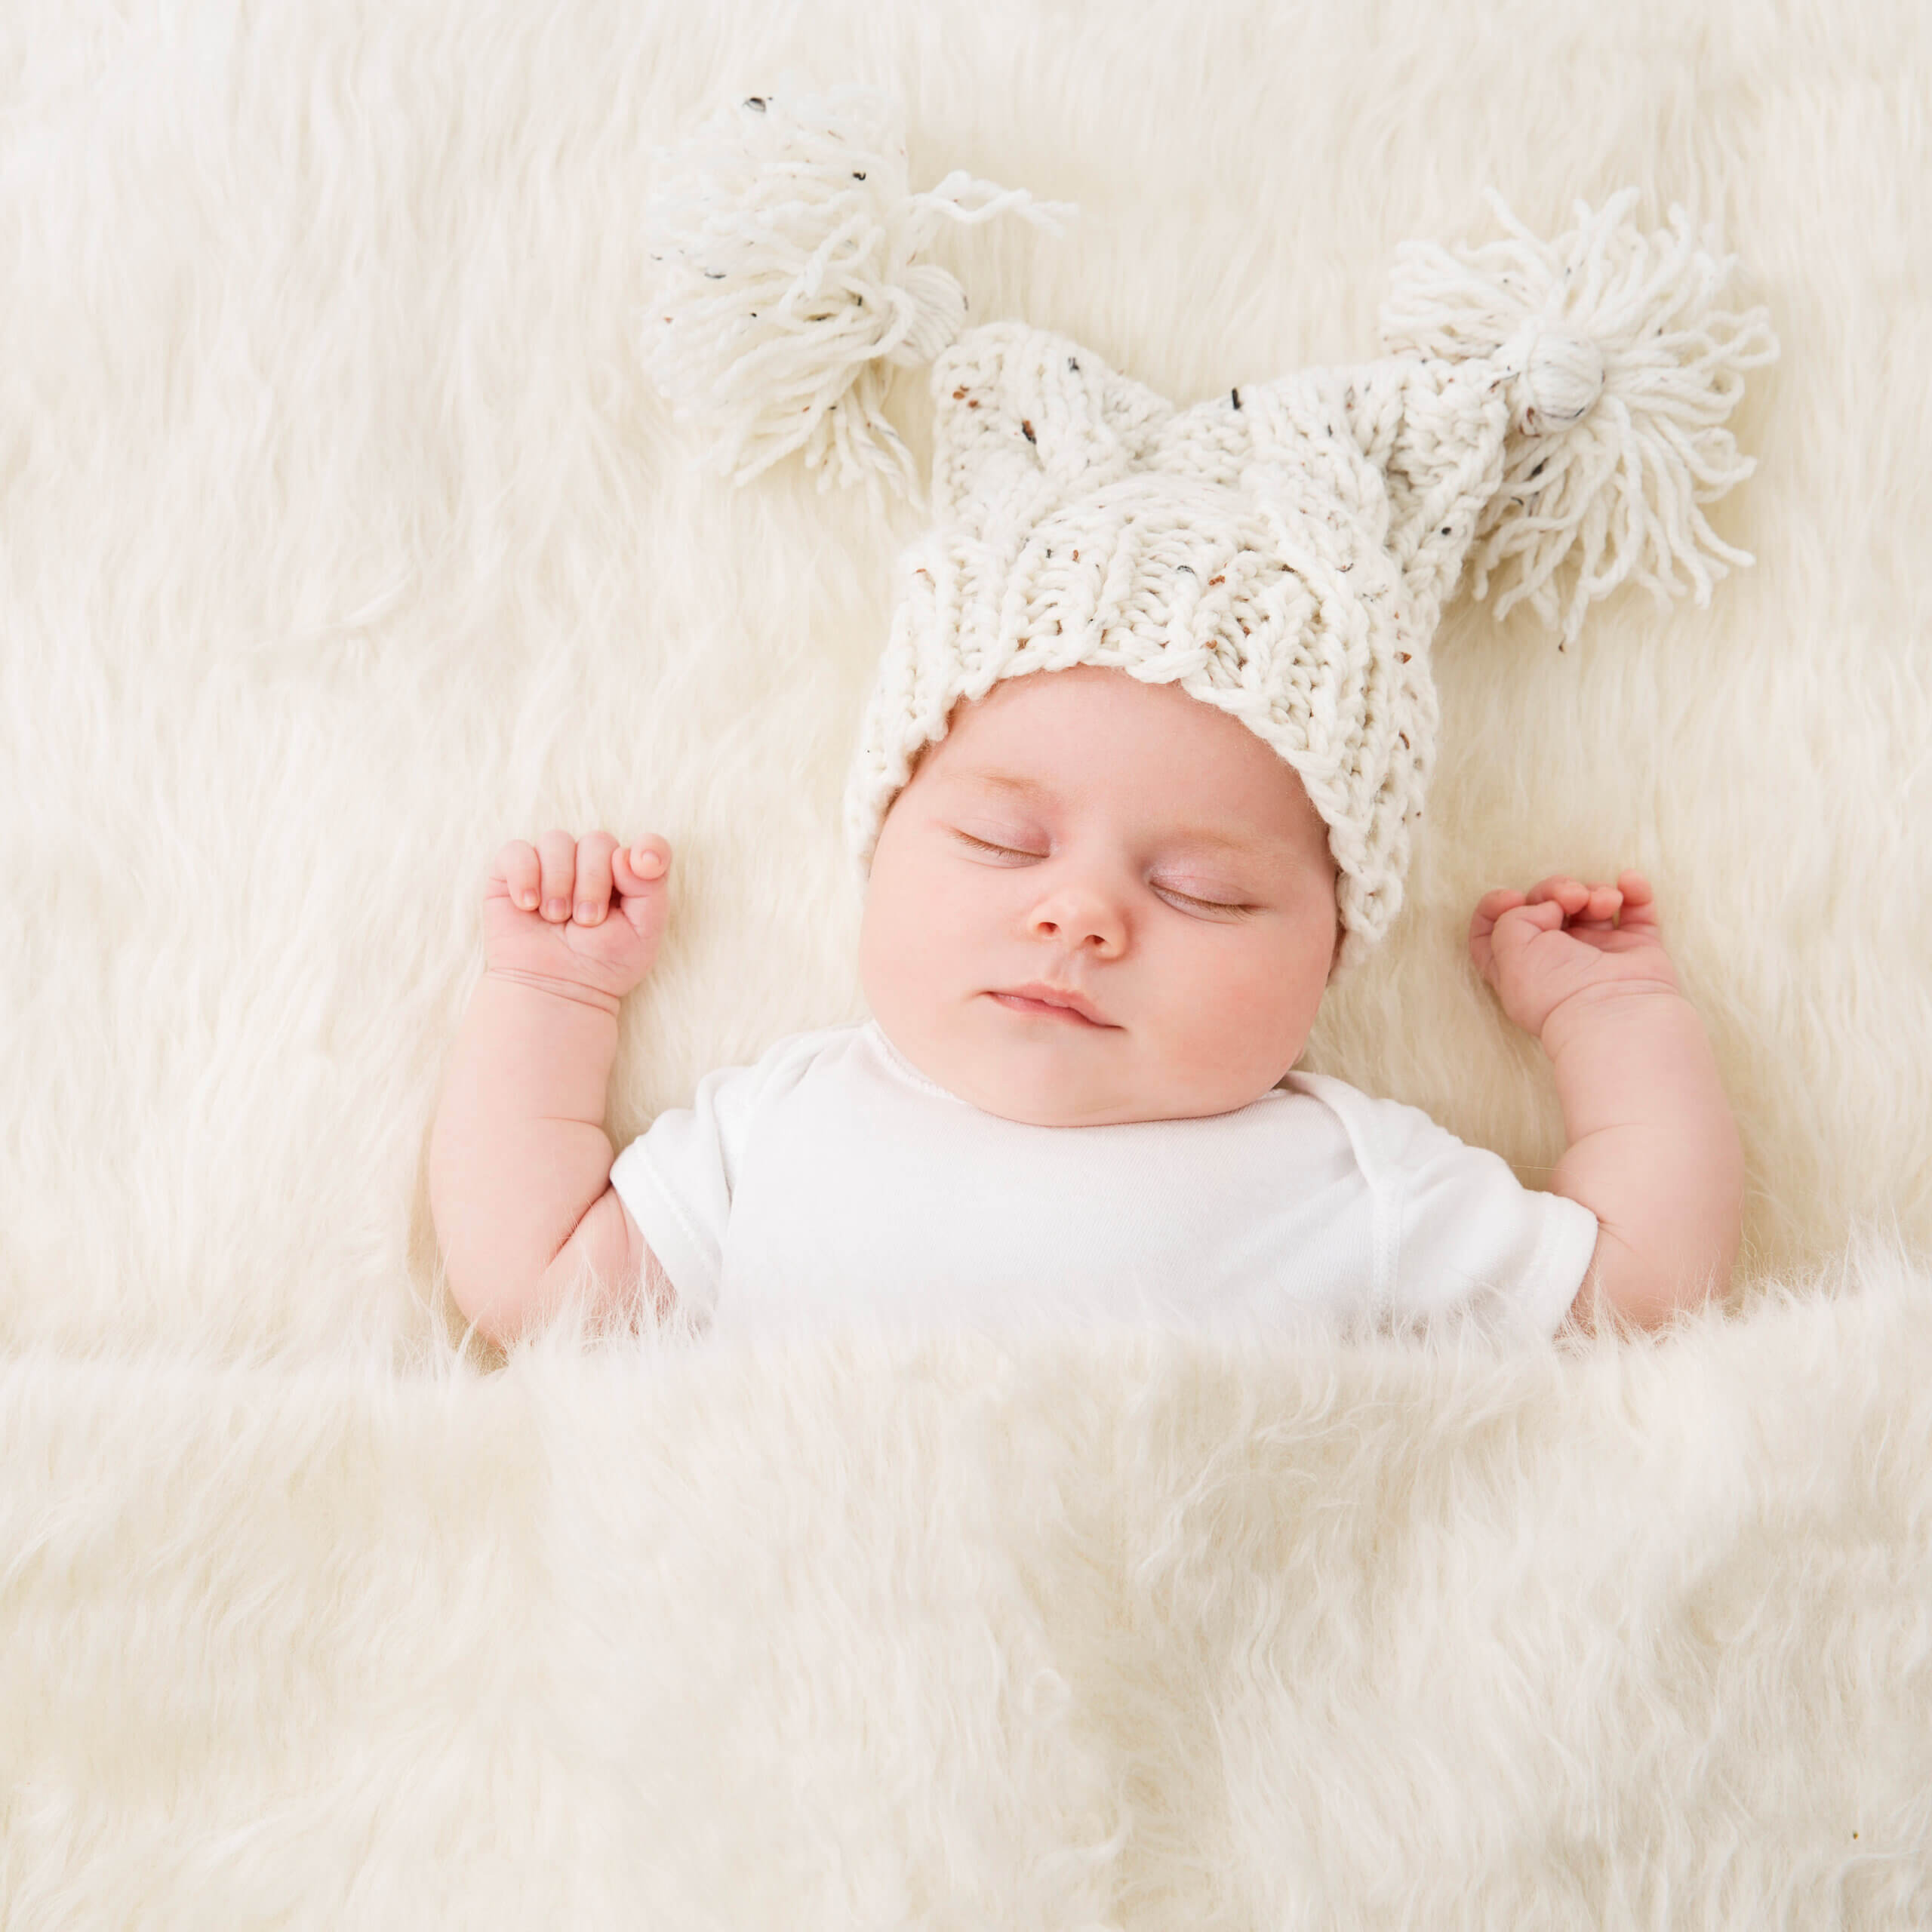 Sleeping Baby, New Born Kid Sleep in Hat, Beautiful Newborn Infant in Bed, One month old